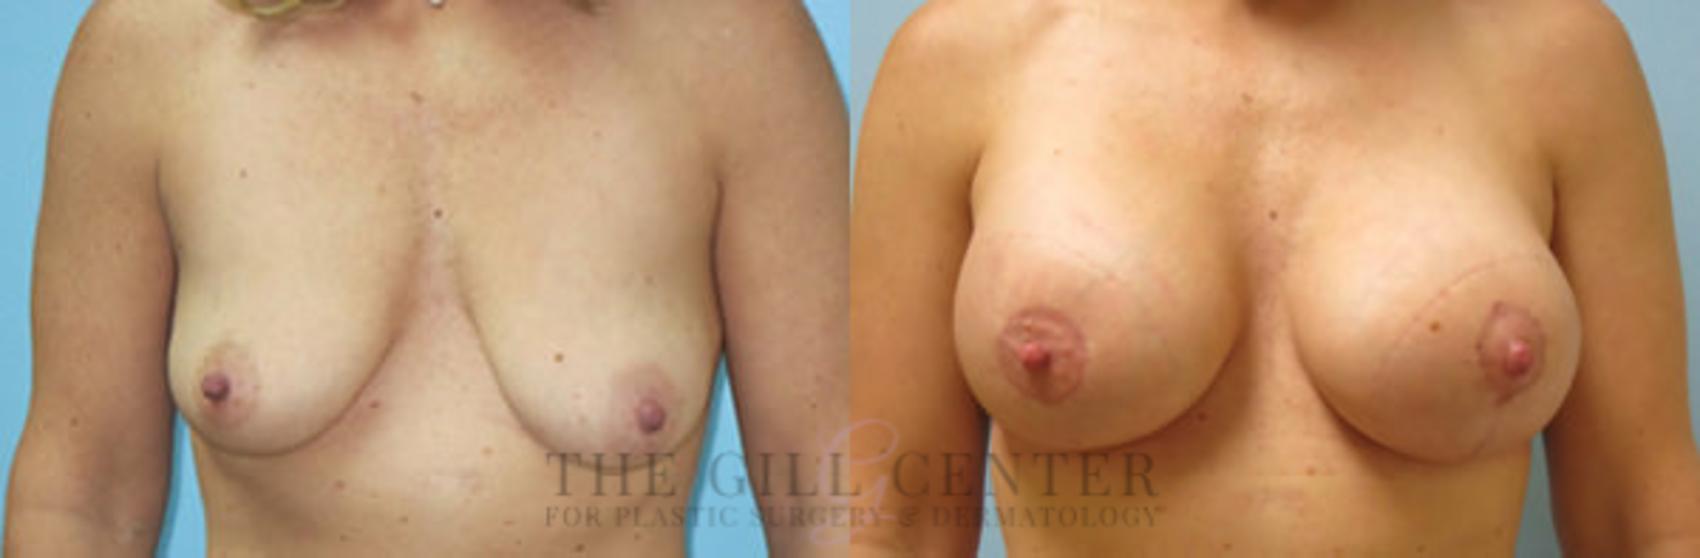 Breast Lift with Implants Case 118 Before & After Front | The Woodlands, TX | The Gill Center for Plastic Surgery and Dermatology